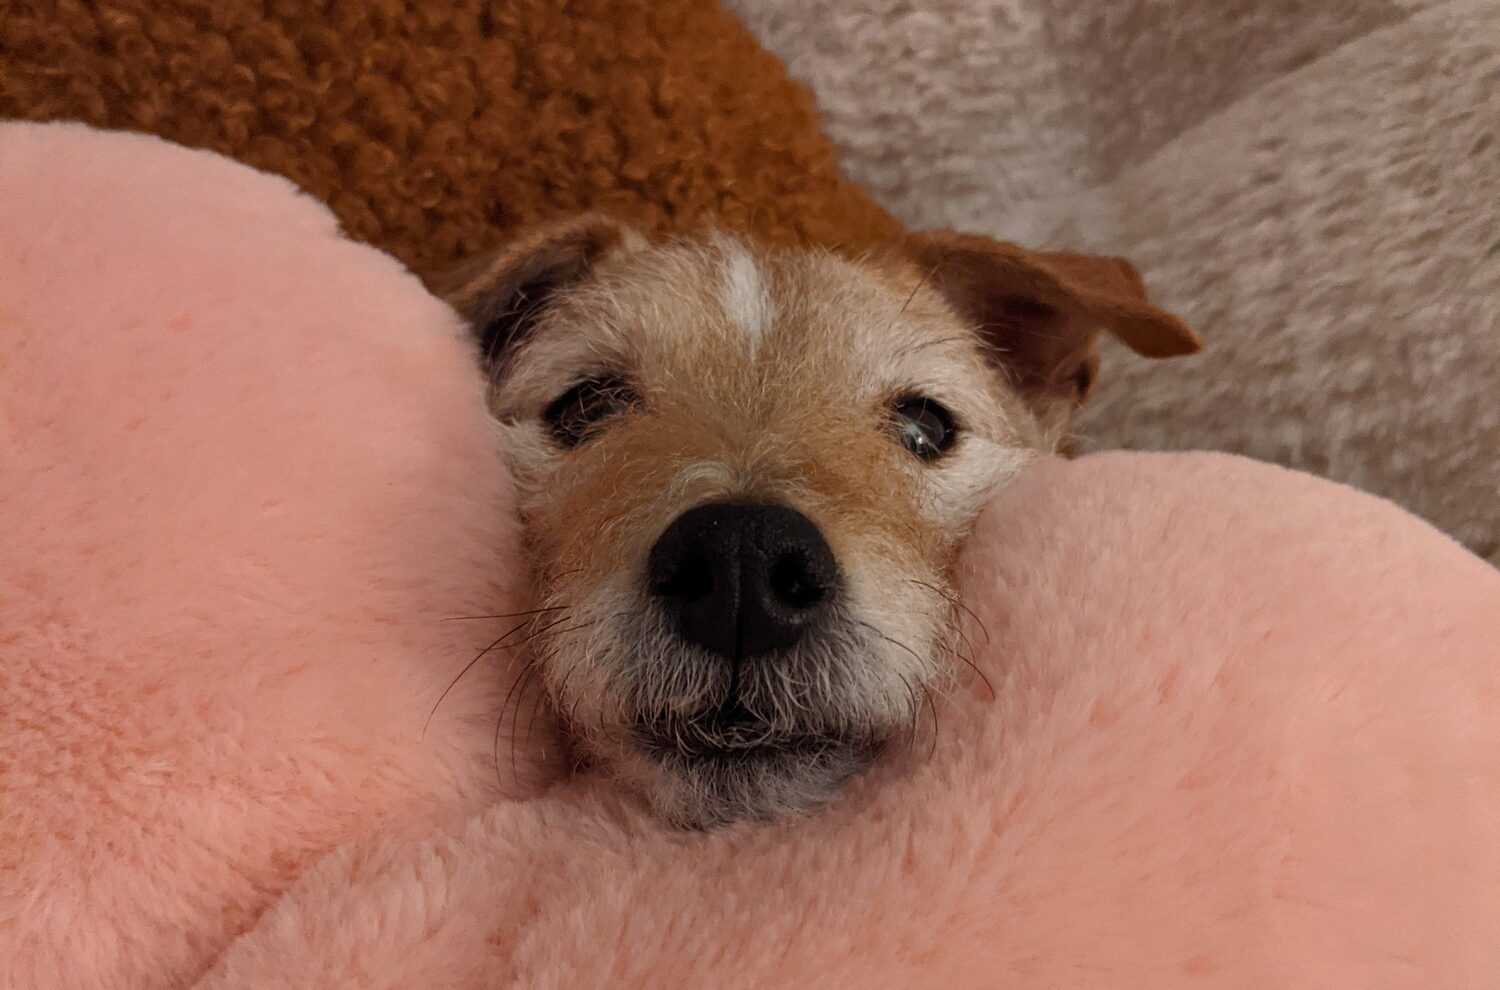 Macy, a tan and white scruffy terrier rests her head on a pink cushion